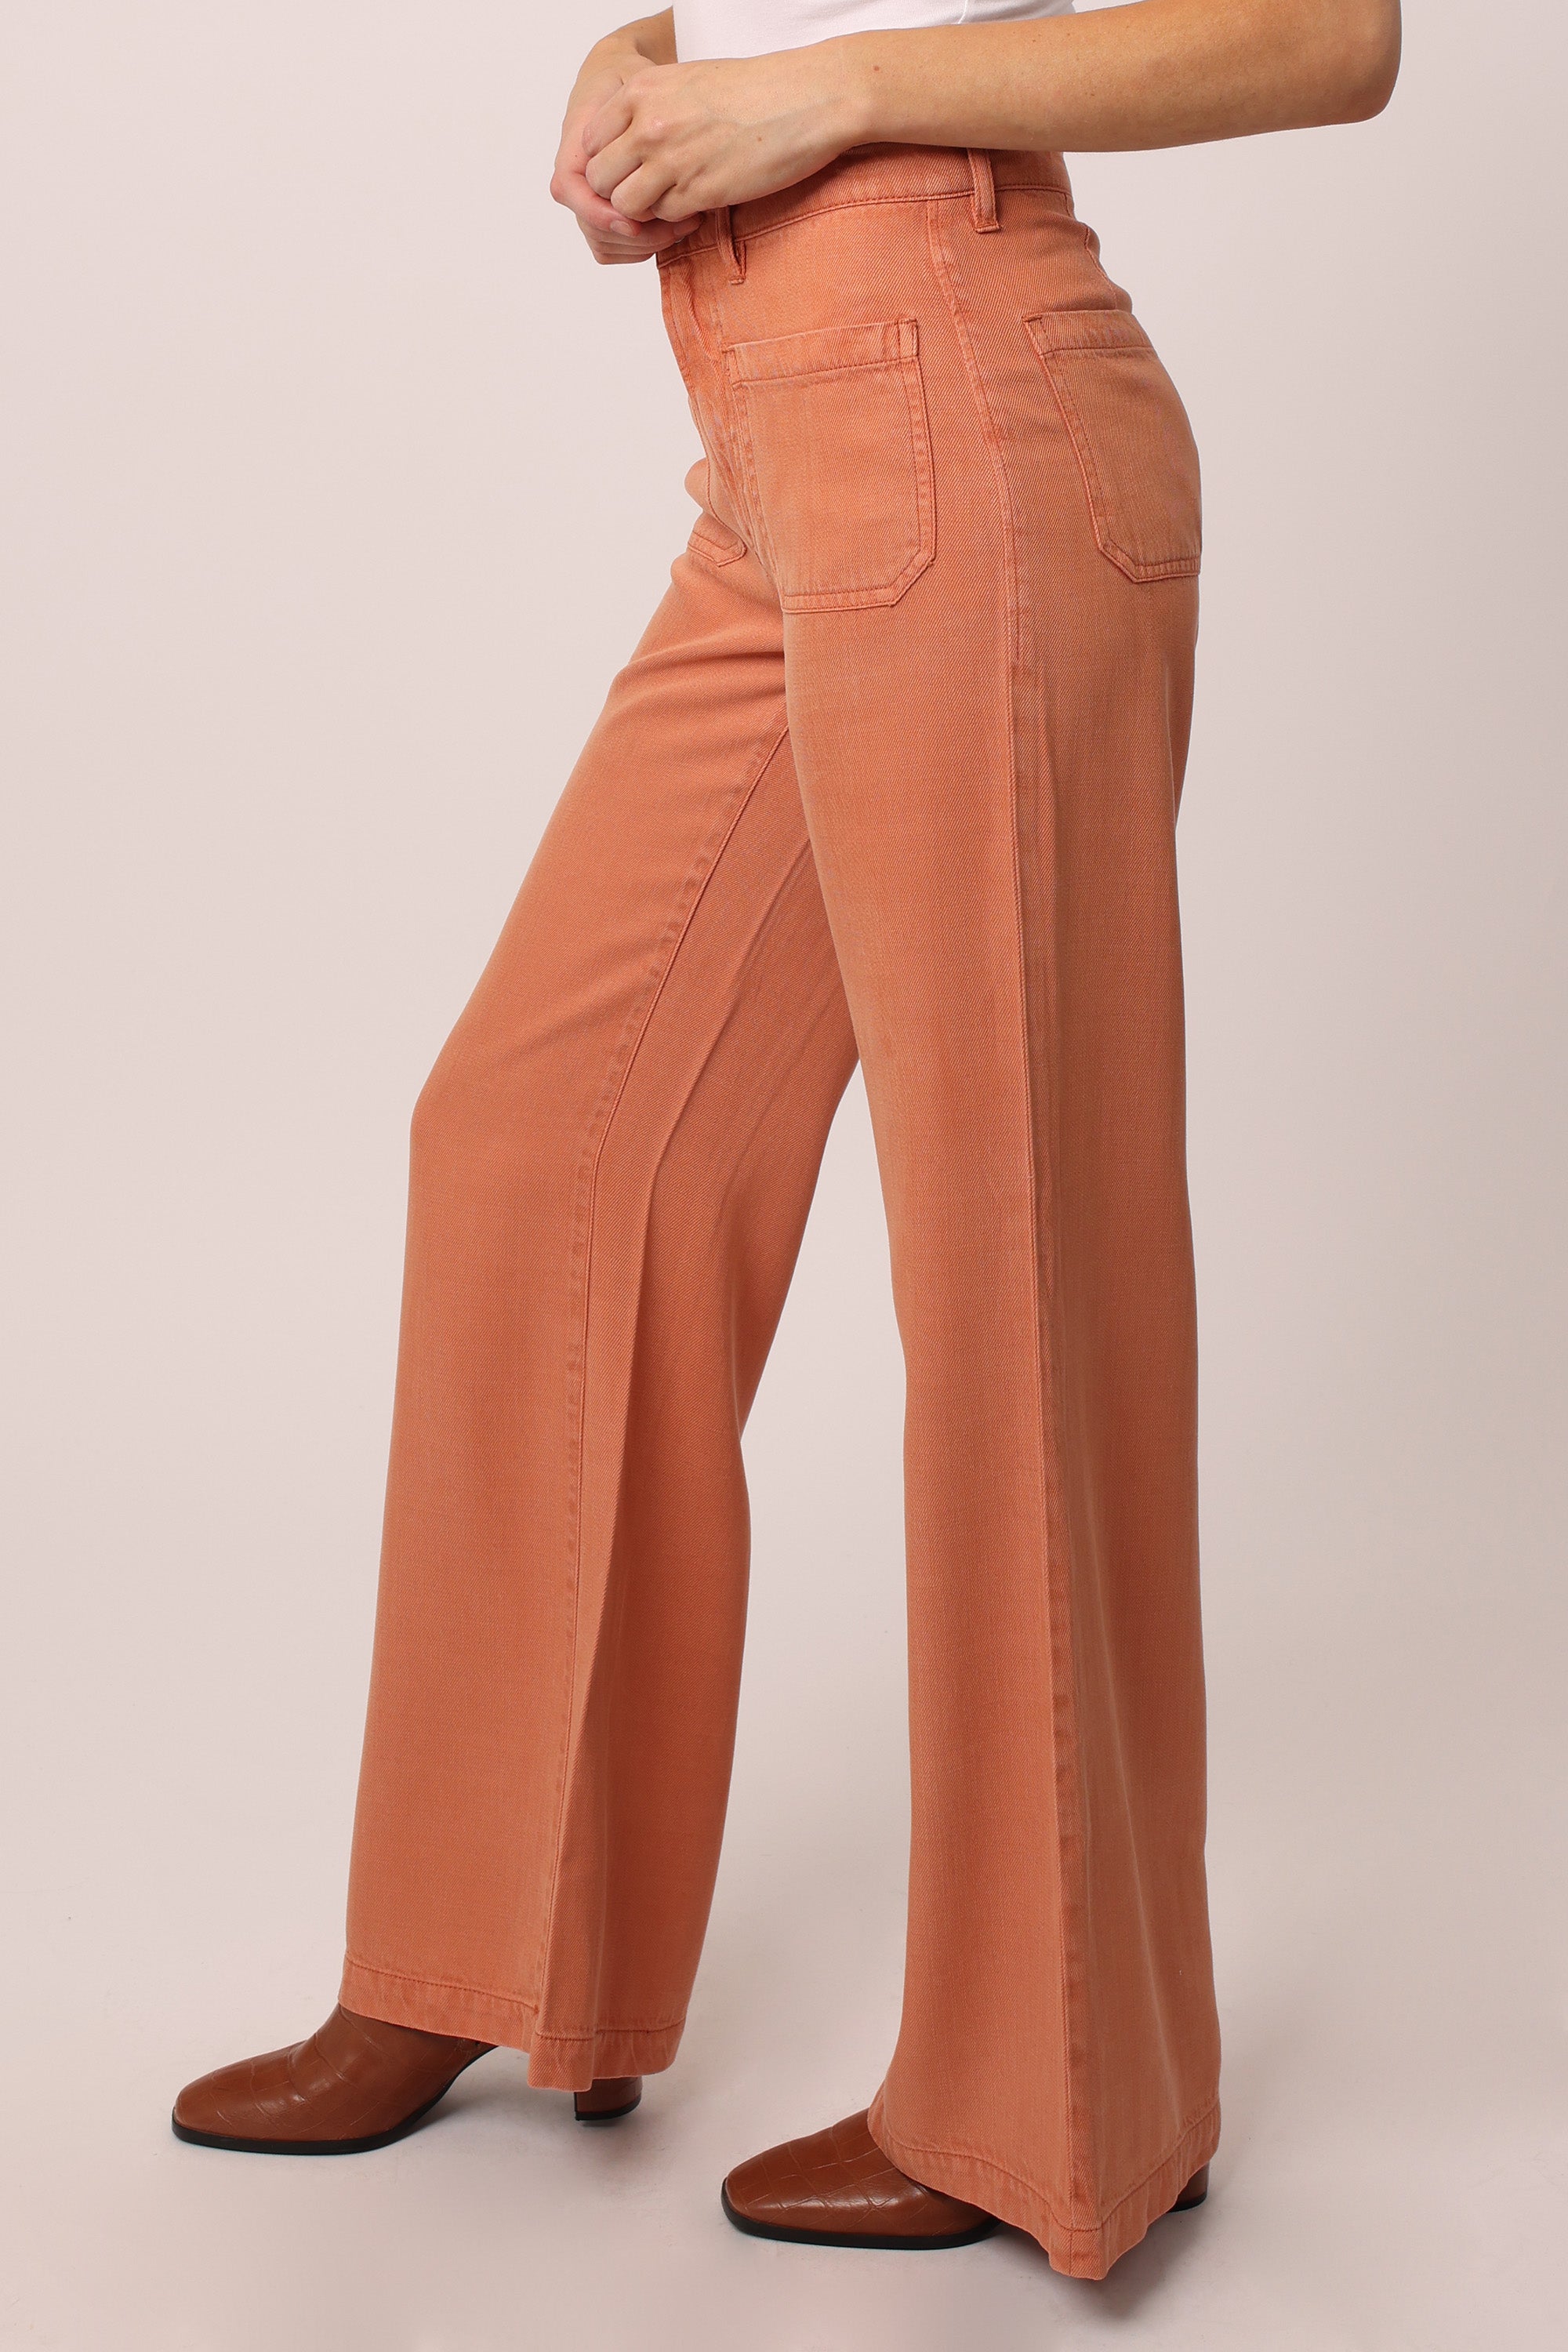 Perspective Helina Comfortable Fit Long Length High Waist Orange Color  Women's Trousers - Trendyol